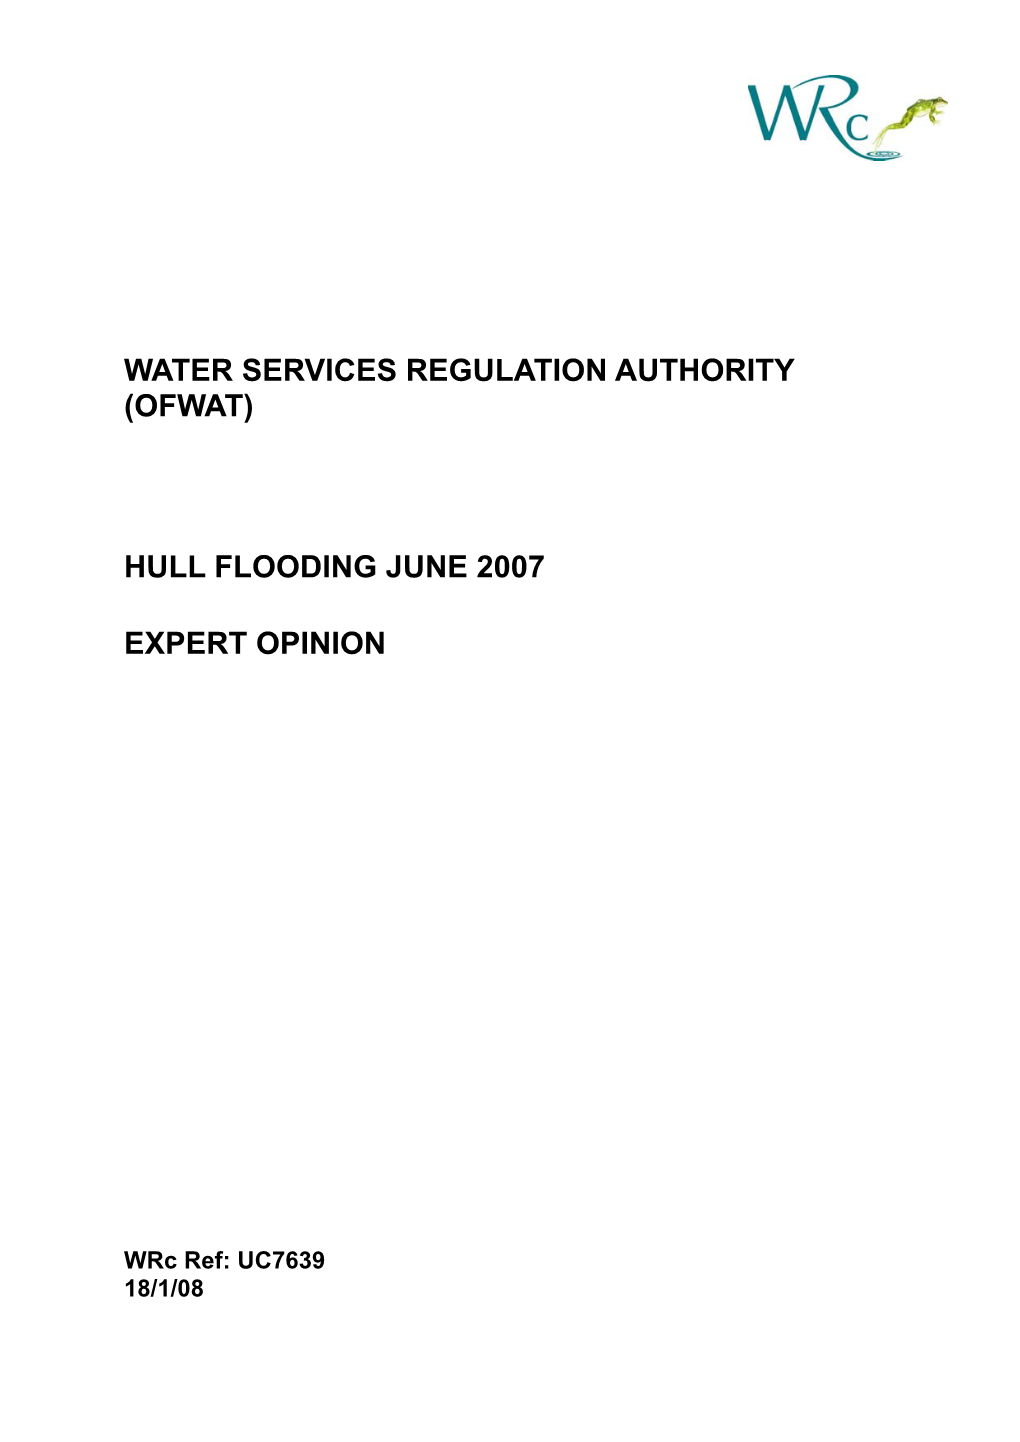 Water Services Regulation Authority (Ofwat) Hull Flooding June 2007